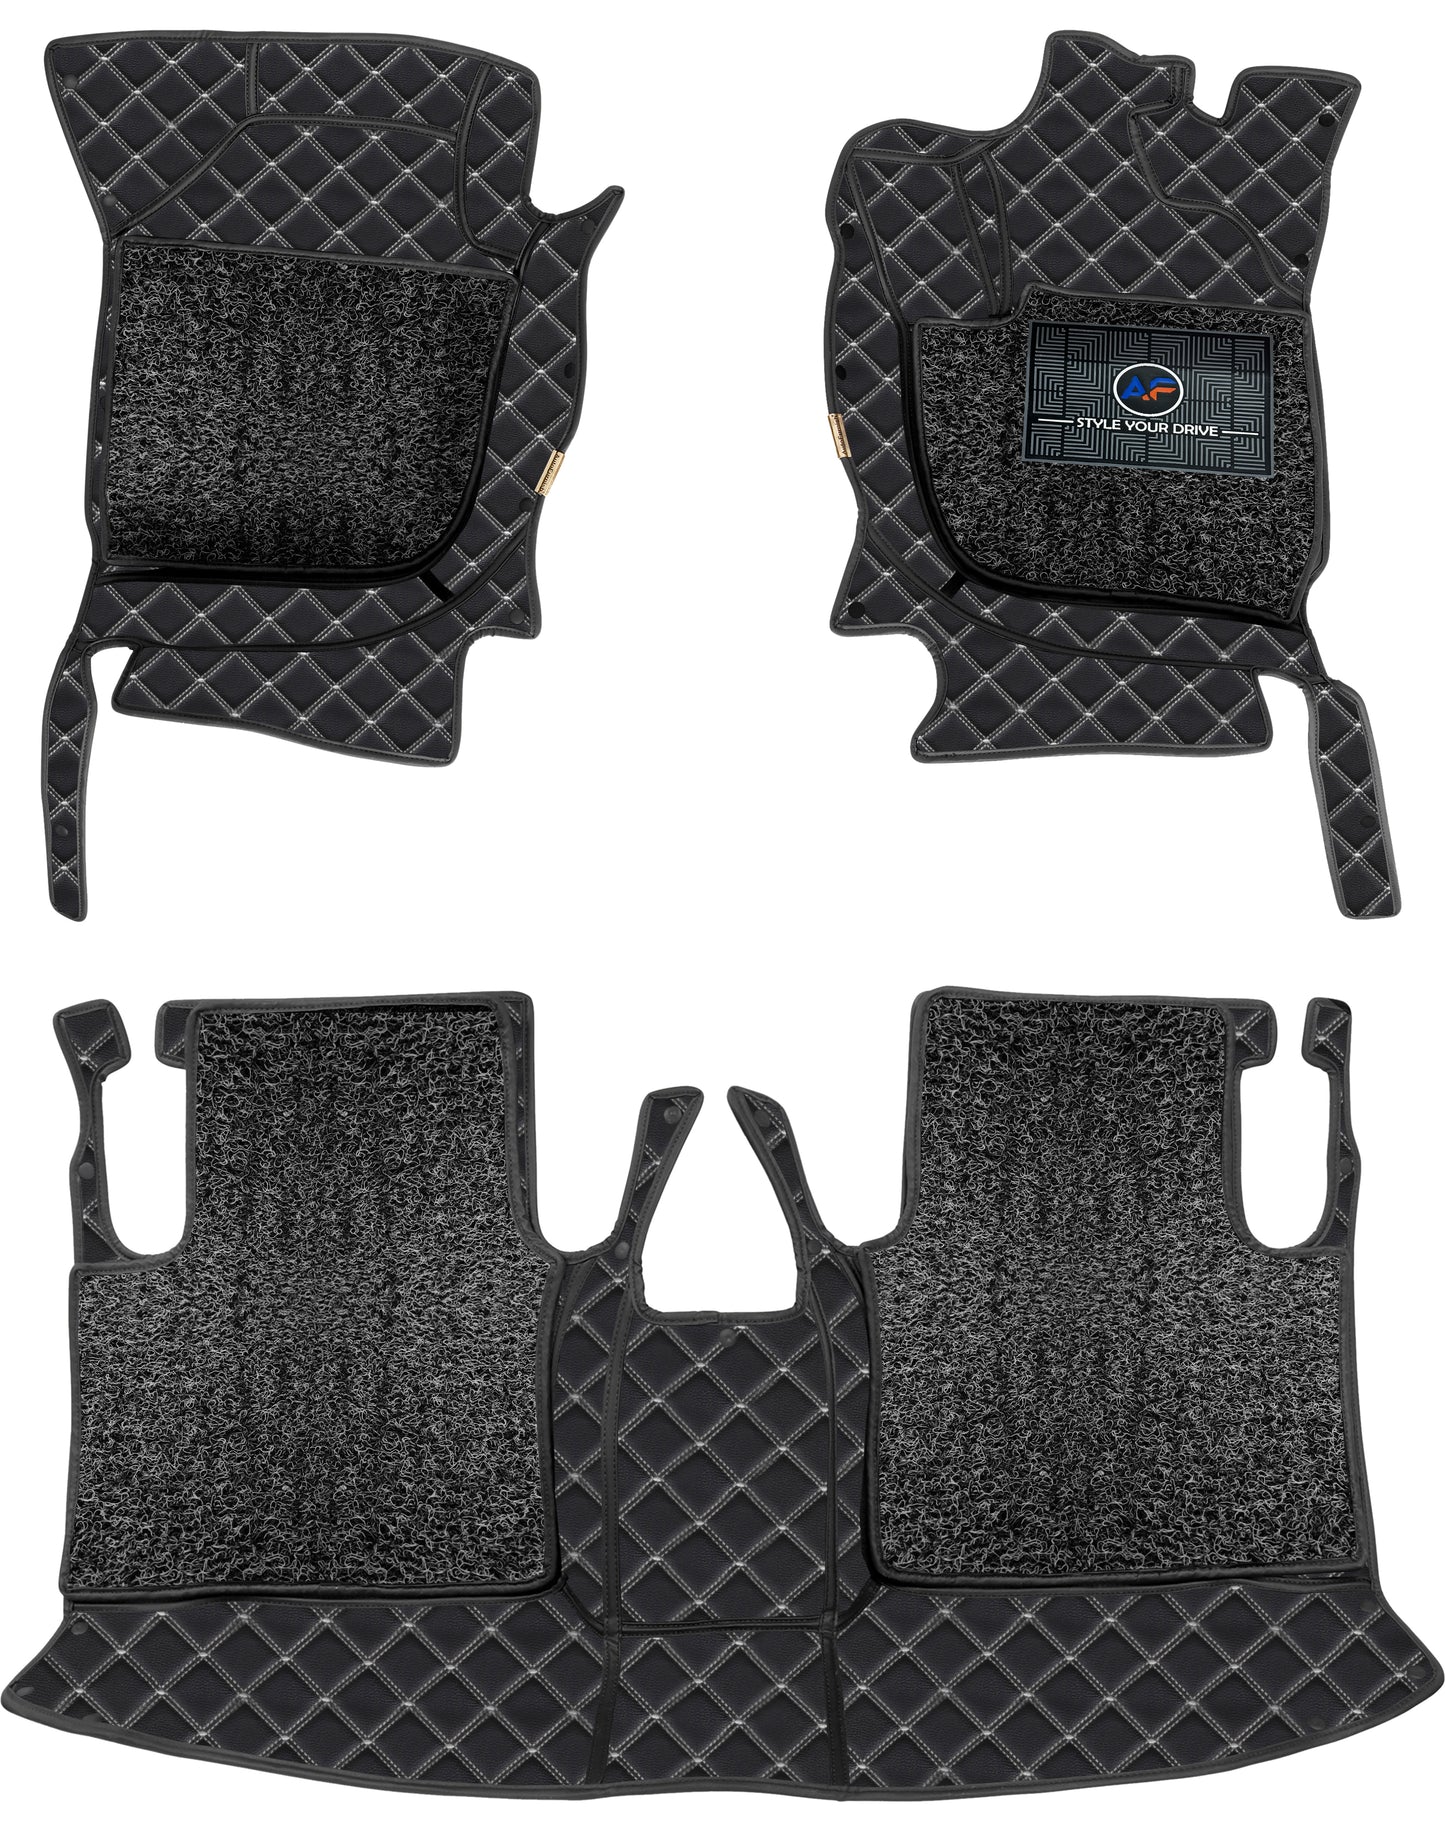 Toyota Etios 2010-16-7D Luxury Car Mat, All Weather Proof, Anti-Skid, 100% Waterproof & Odorless with Unique Diamond Fish Design (24mm Luxury PU Leather, 2 Rows)